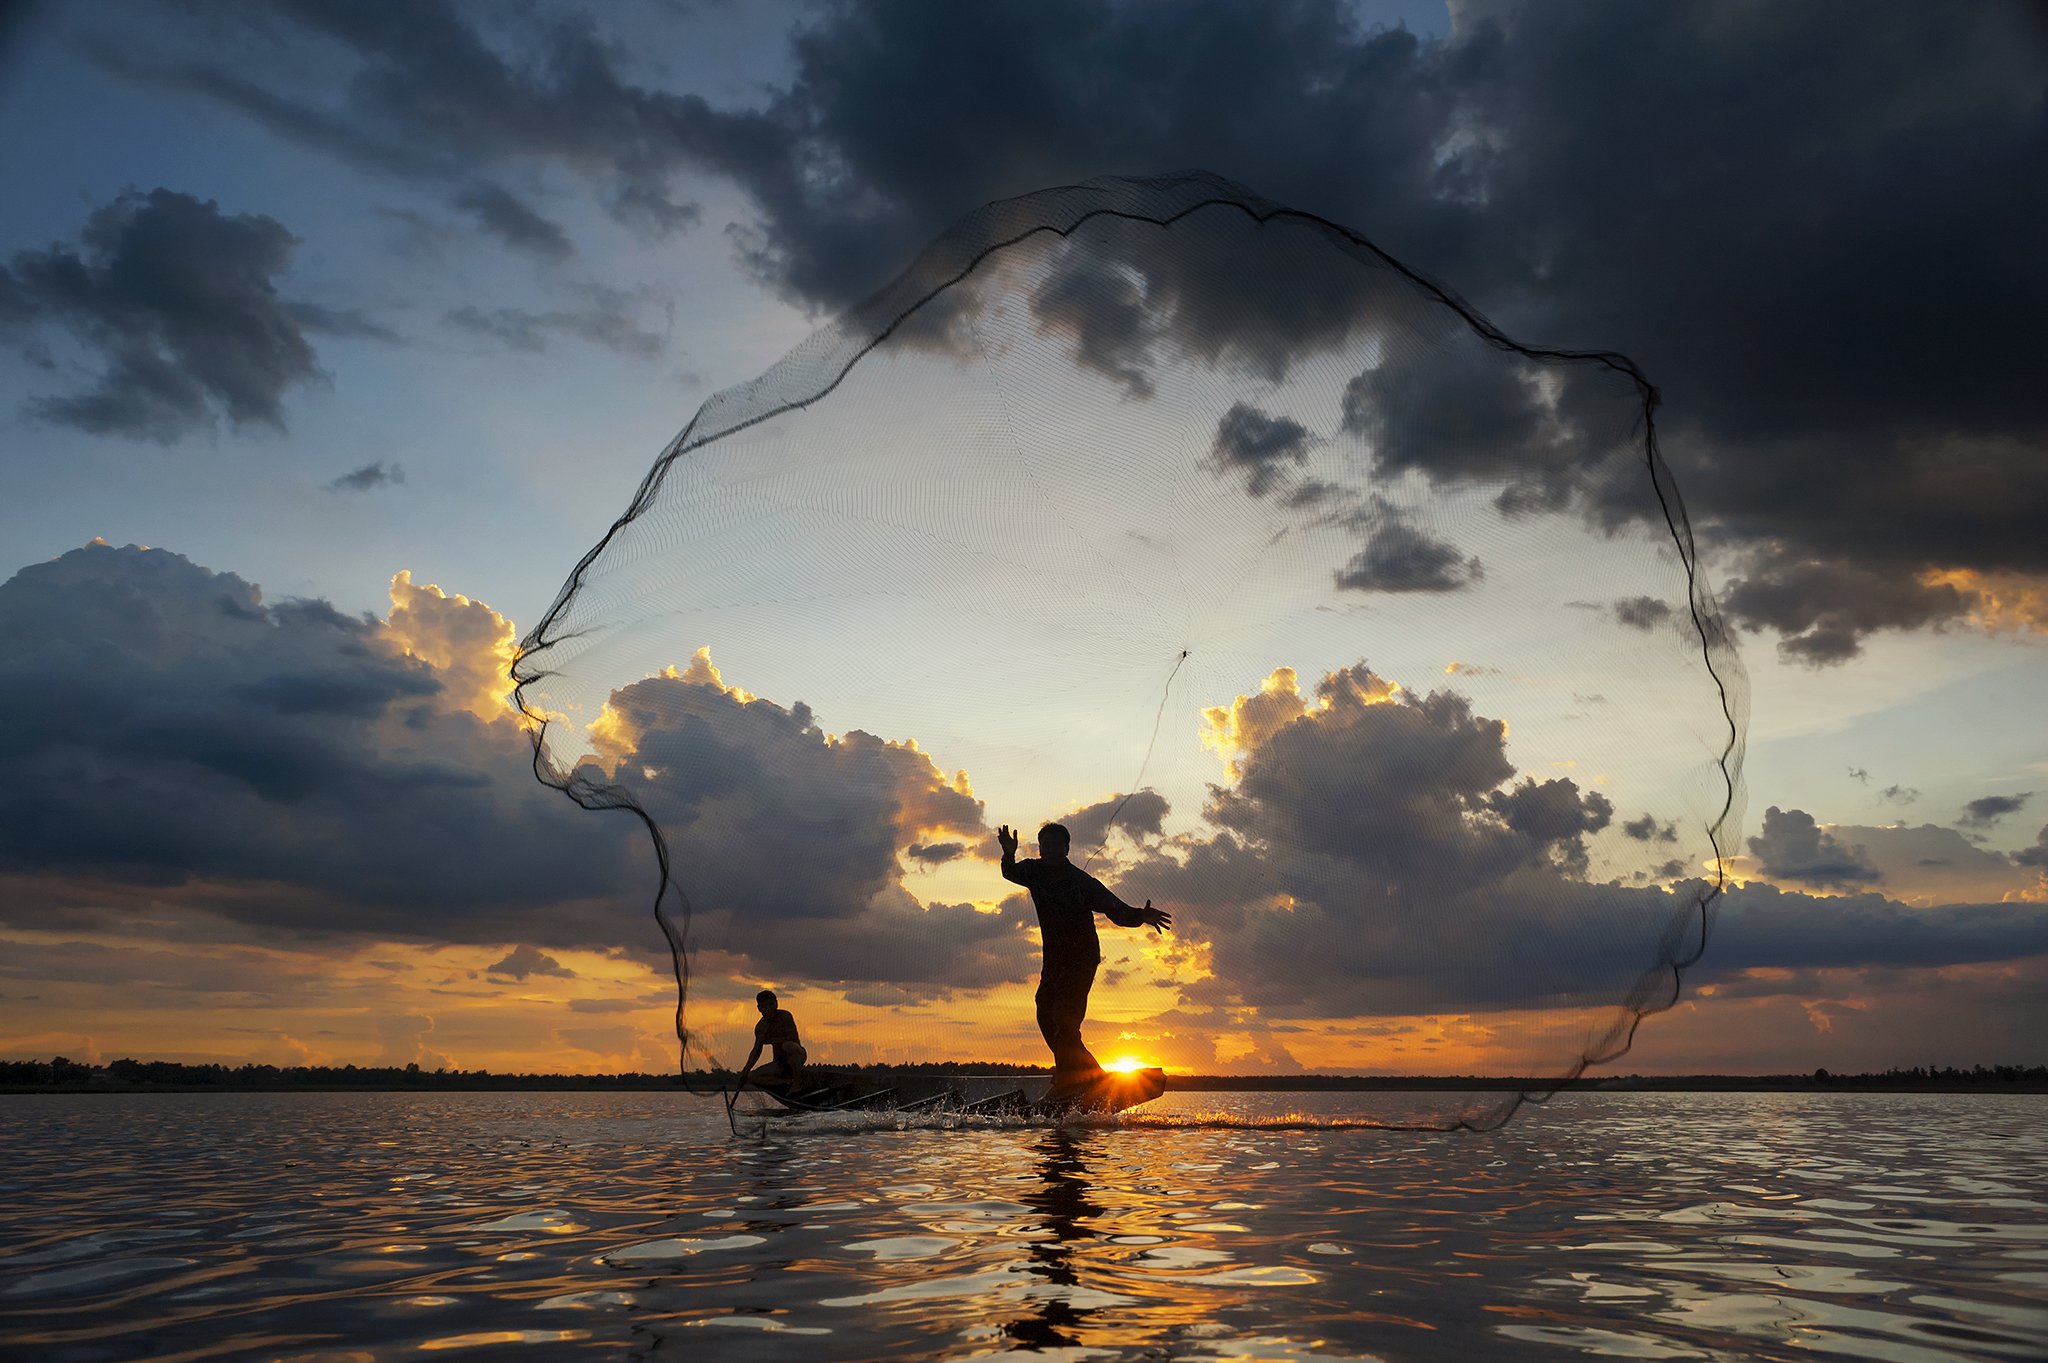 Action, Asia, Asian, Clouds, Colors, Concept, Culture, Fish, Fisherman, Fishing, Kingfisher, Moment, Nets, Ocean, Sea, Sky, Sun, Sunlight, Sunrise, Sunset, Water, Saravut Whanset